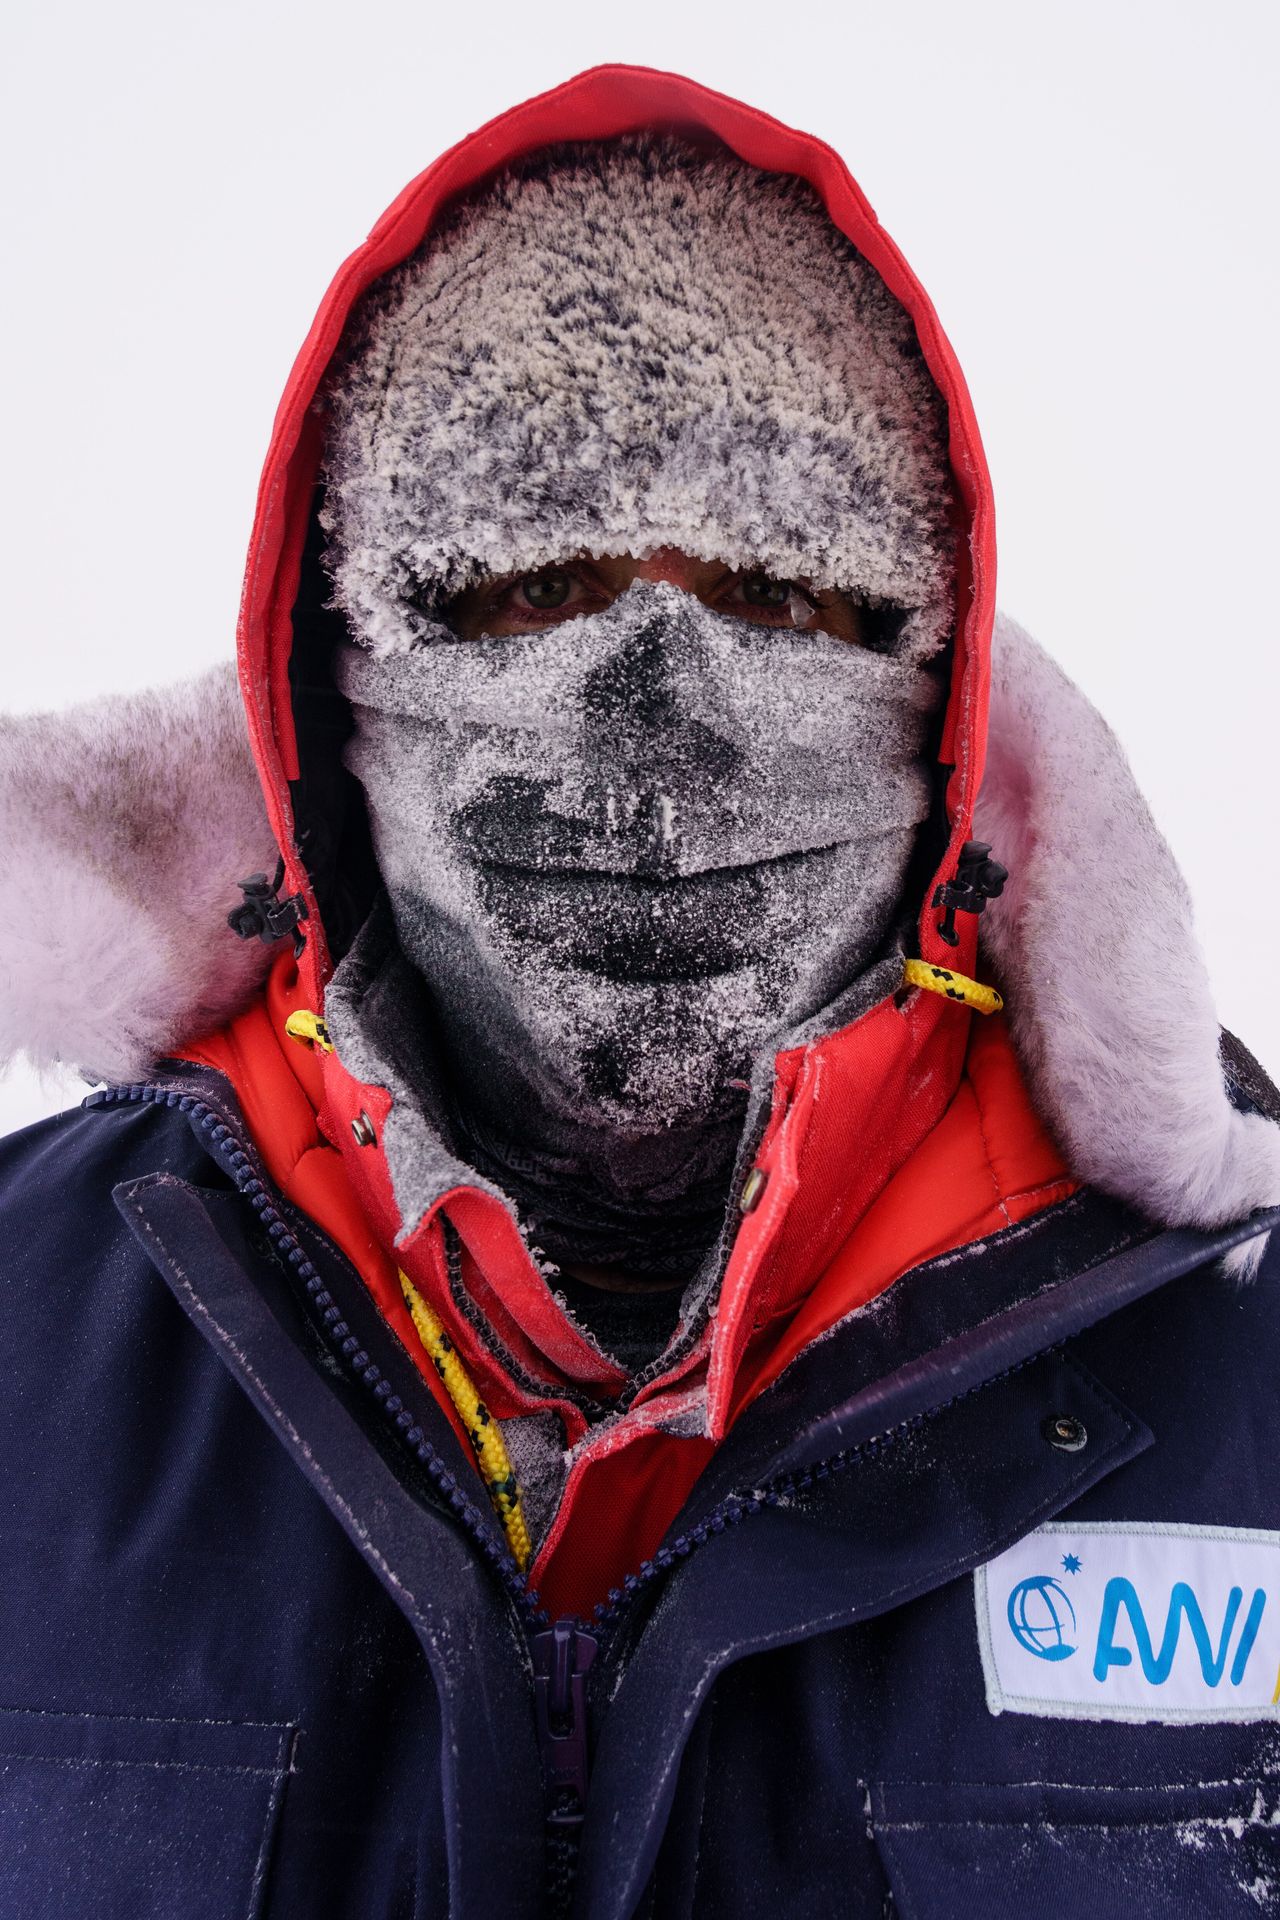 Storms and brutally cold temperatures make science difficult at the top of the world.